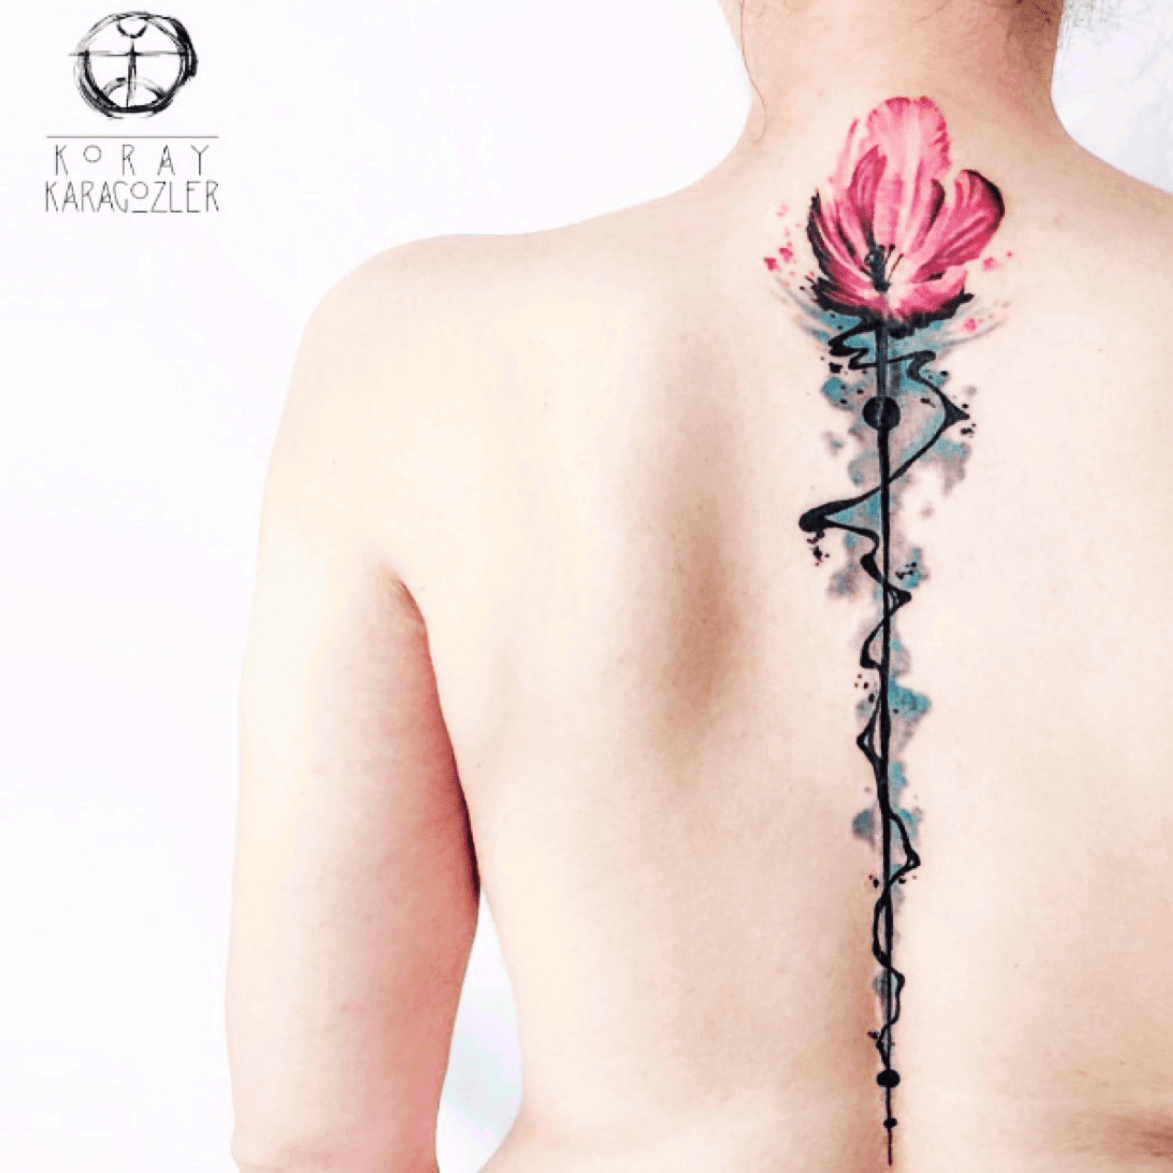 20 Beautiful Spine Tattoo Ideas To Make Your Back Look A Lot Sexier